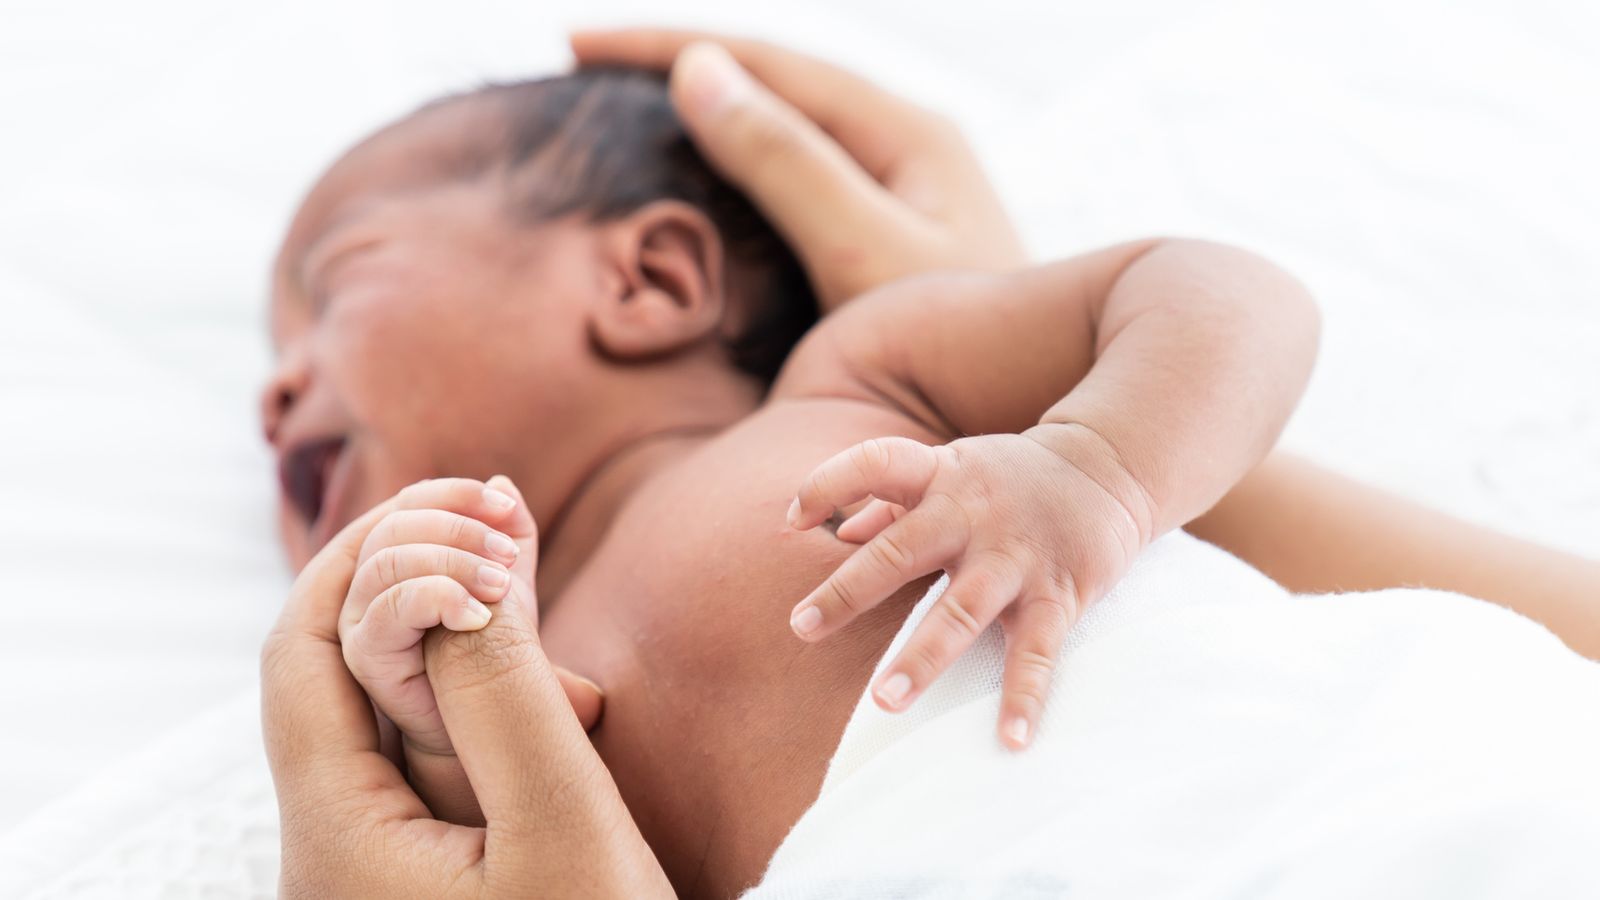 Newborn babies from black, Asian and ethnically diverse